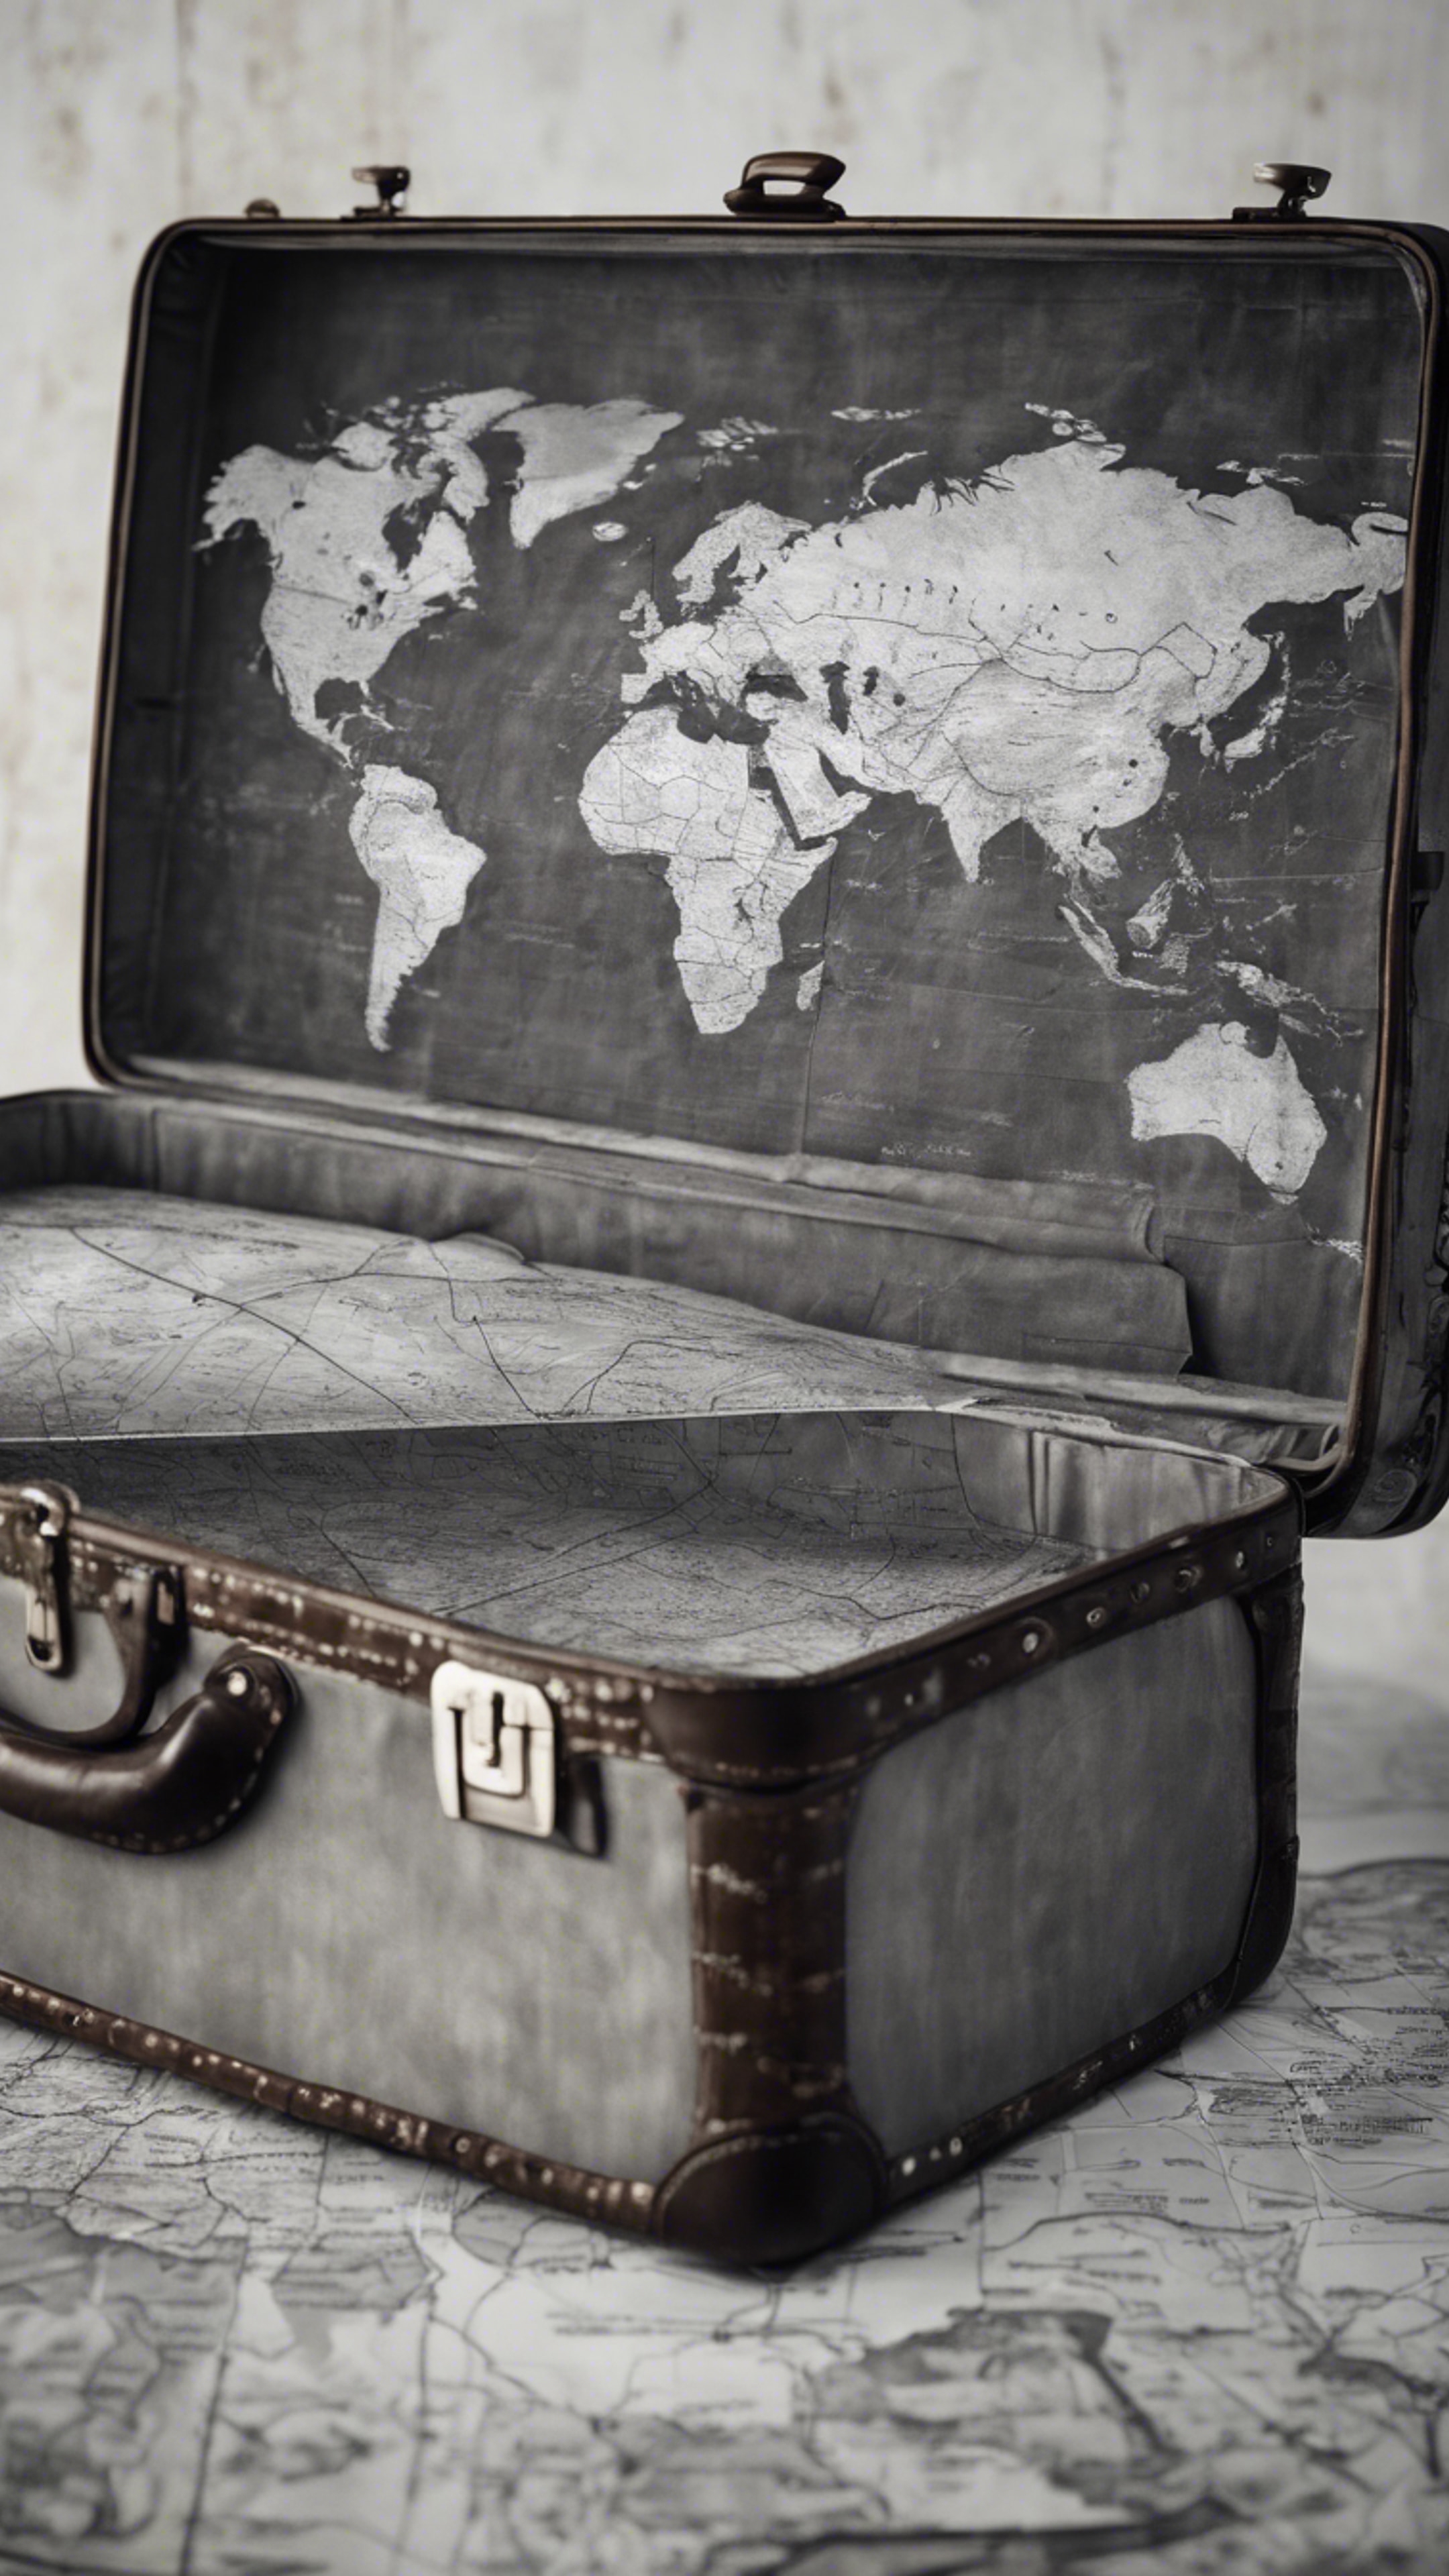 A grayscale world map painted on a vintage suitcase. 벽지[27f356ac8e6847fe804a]